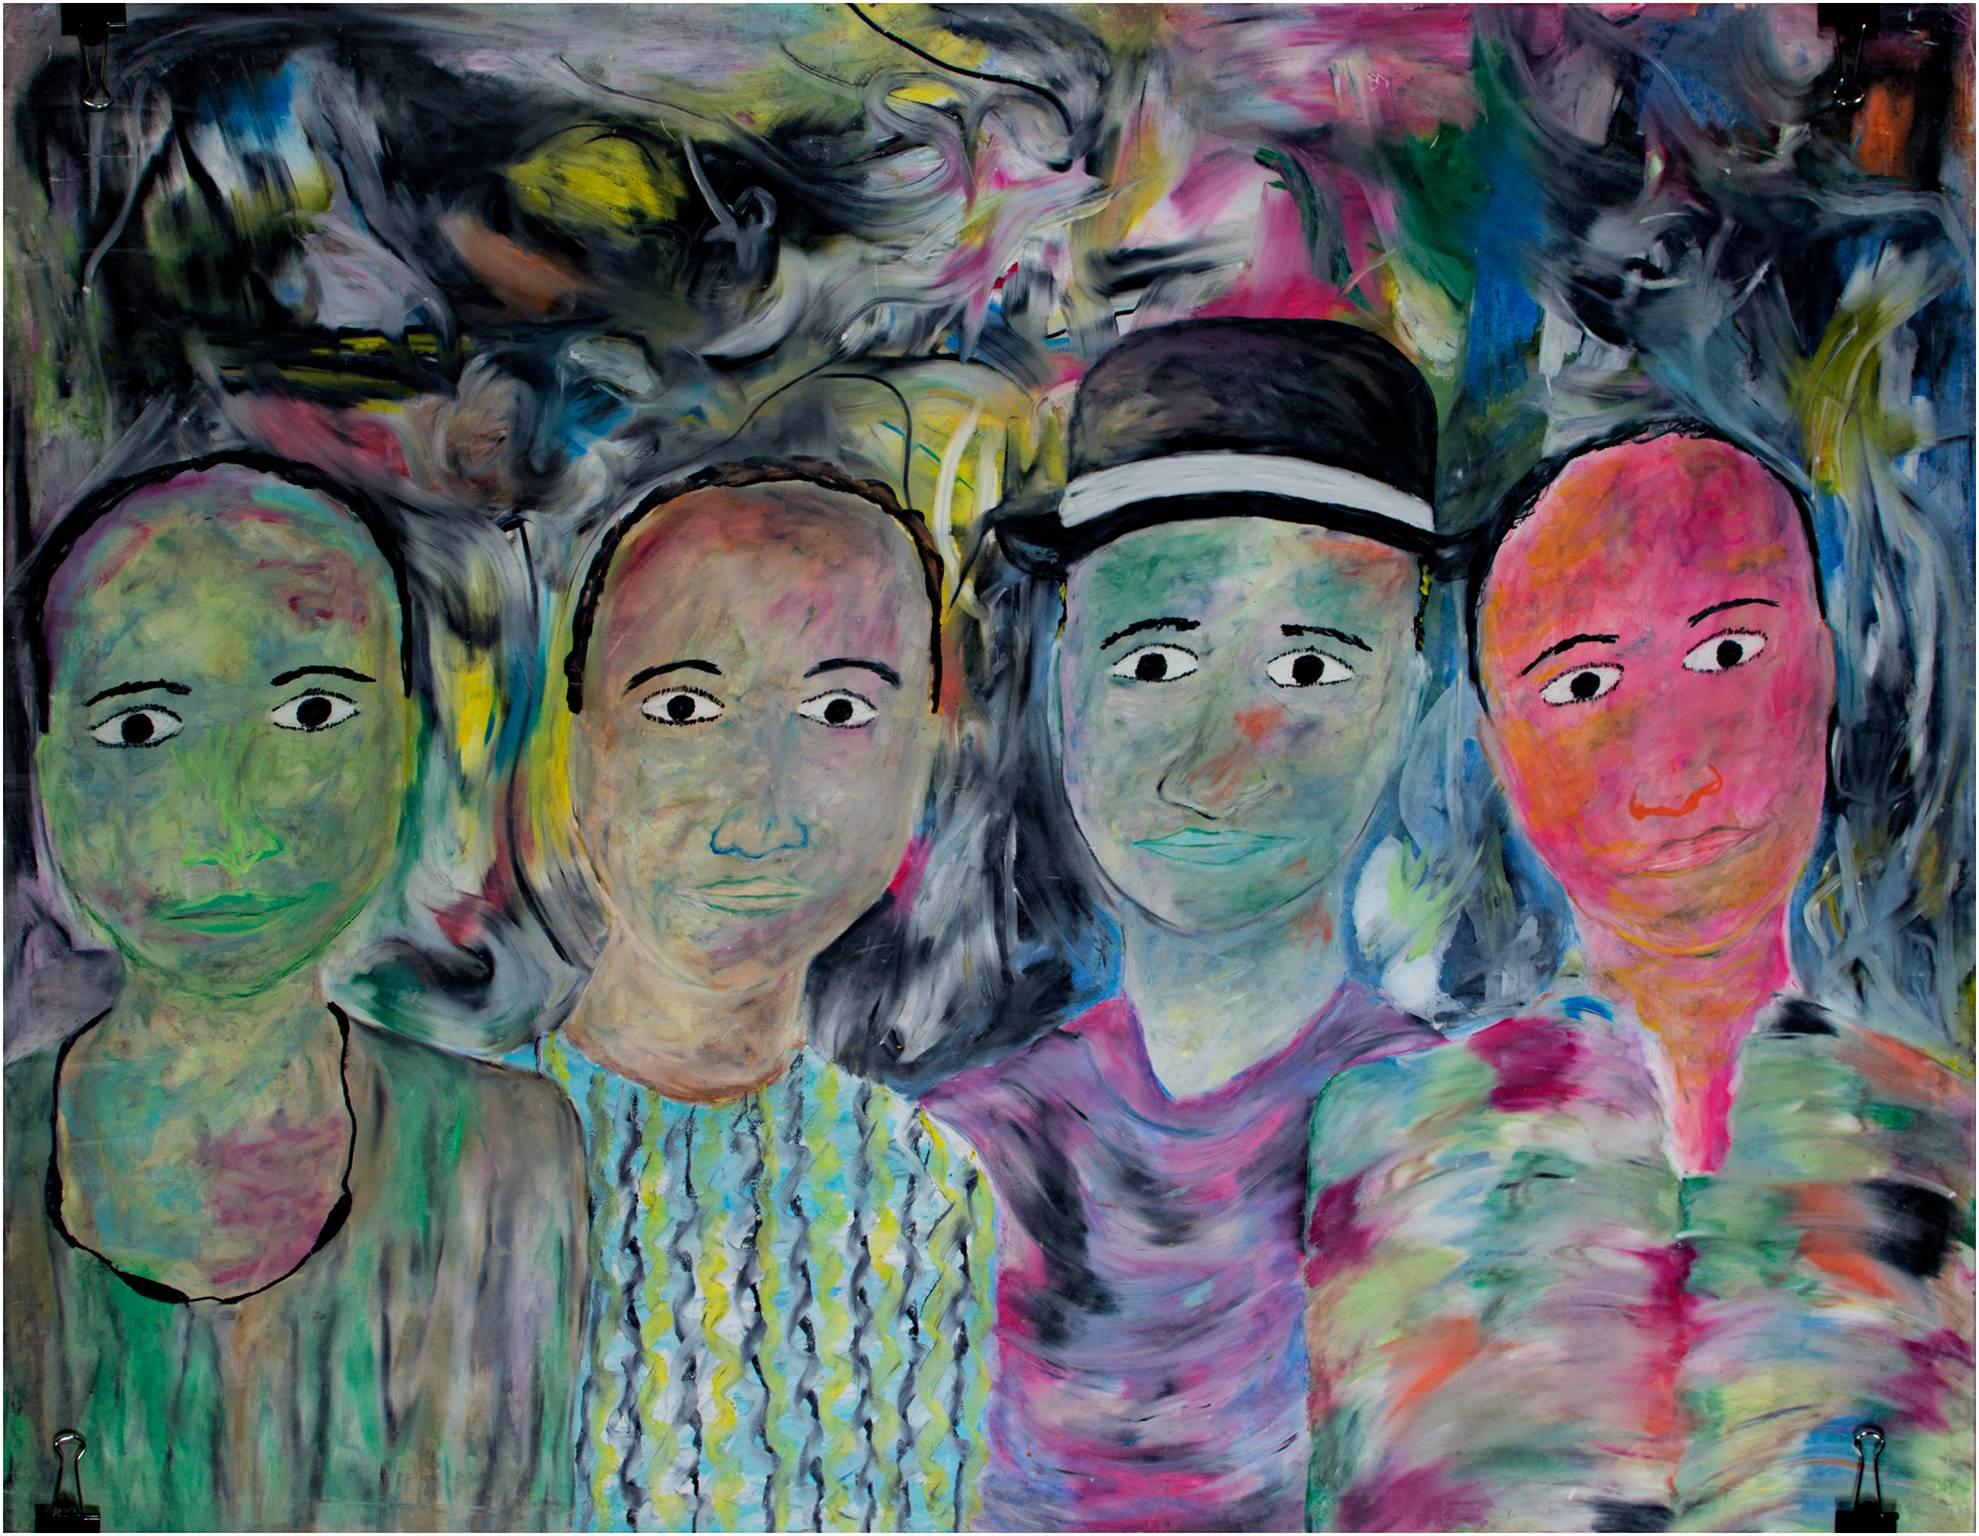 "Sincerely Yours" is an original oil pastel drawing mounted to cardboard. The artist, Reginald K. Gee, signed the piece on the back. This piece depicts four men looking out at the viewer. Each wears a colorful shirt.

30" x 40" art

Reginald K. Gee